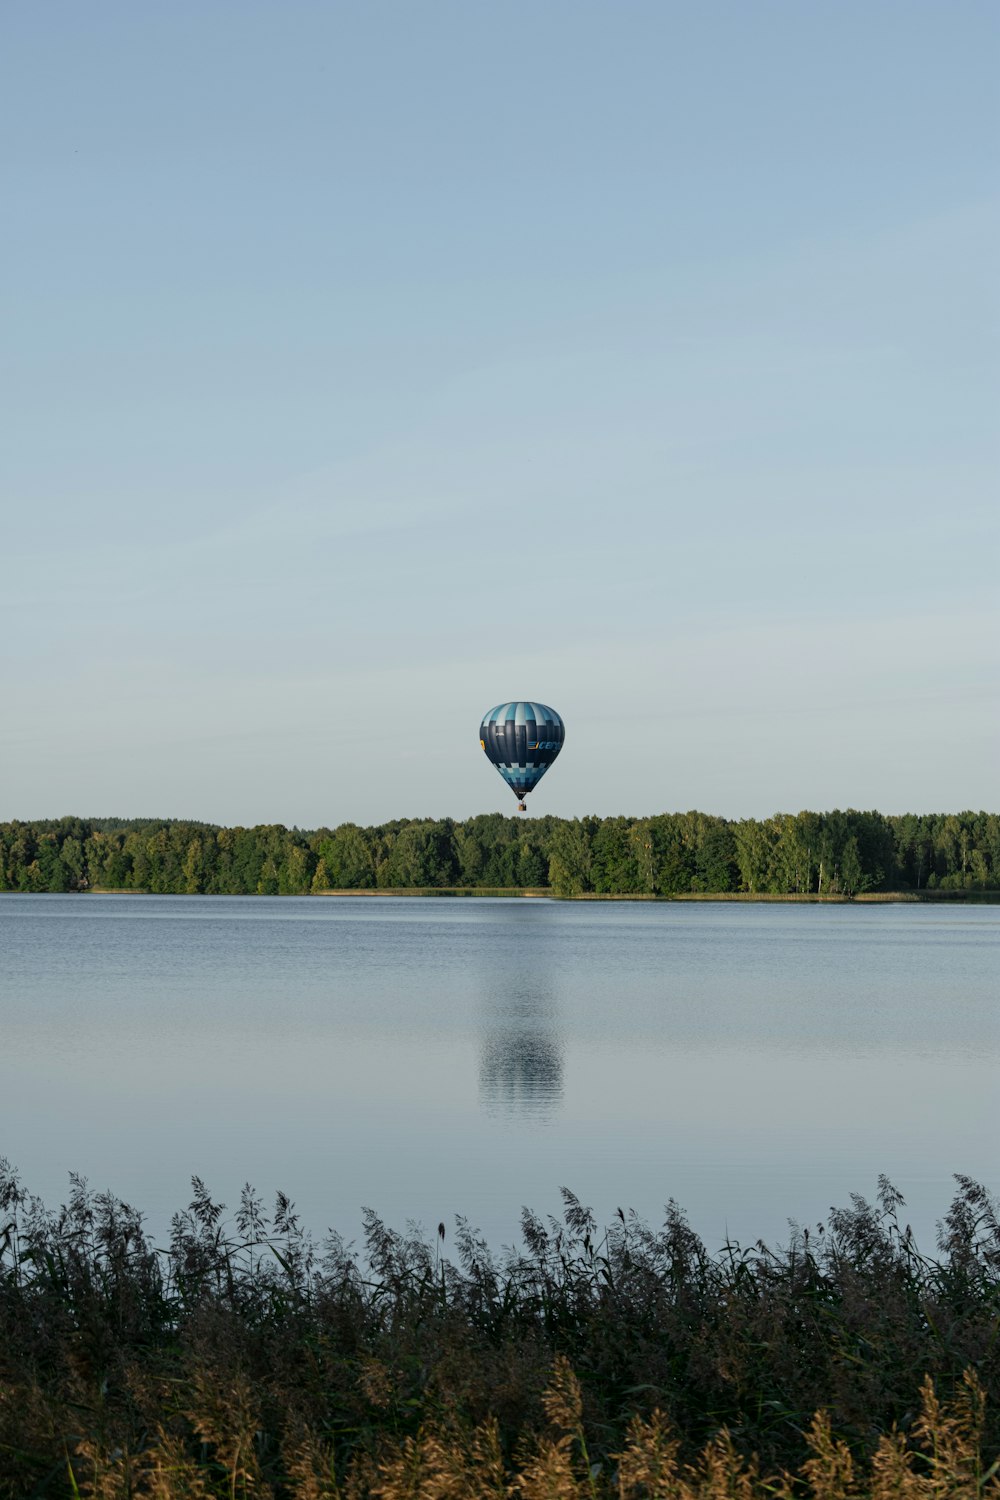 a hot air balloon flying over a lake